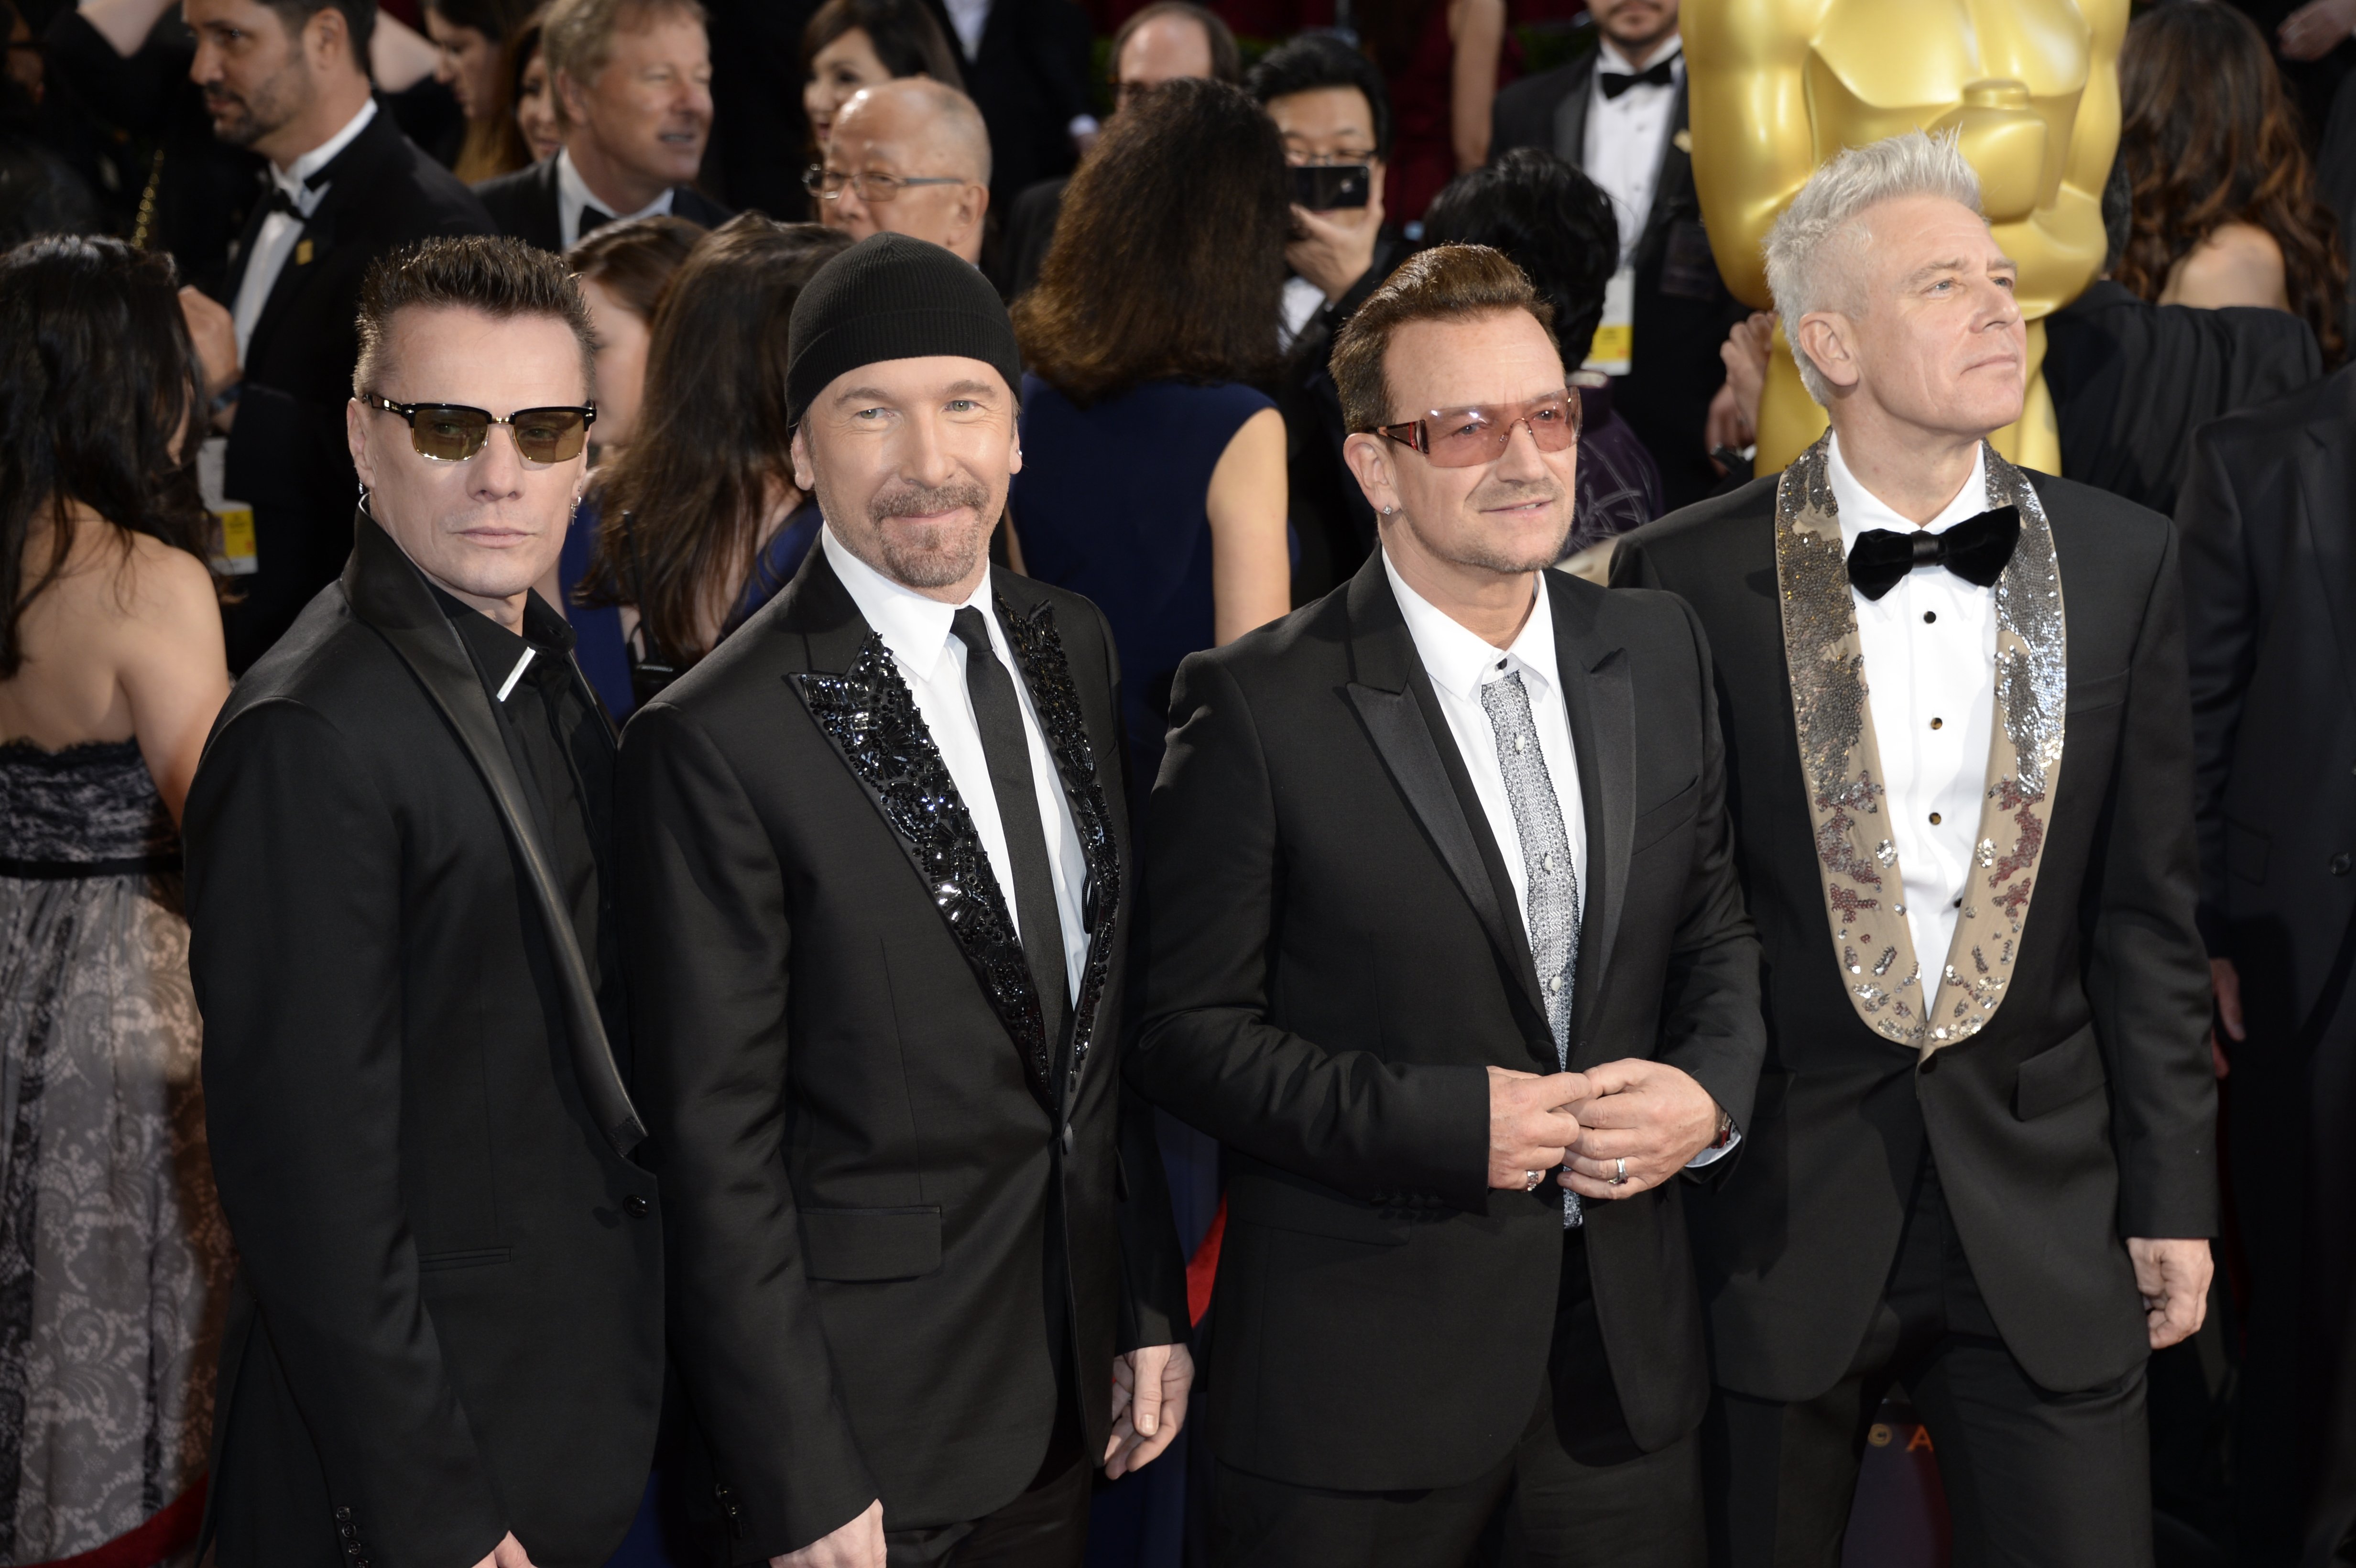 U2 appears on the red carpet at the 86th Academy Awards on Sunday, March 2, 2014 in Los Angeles